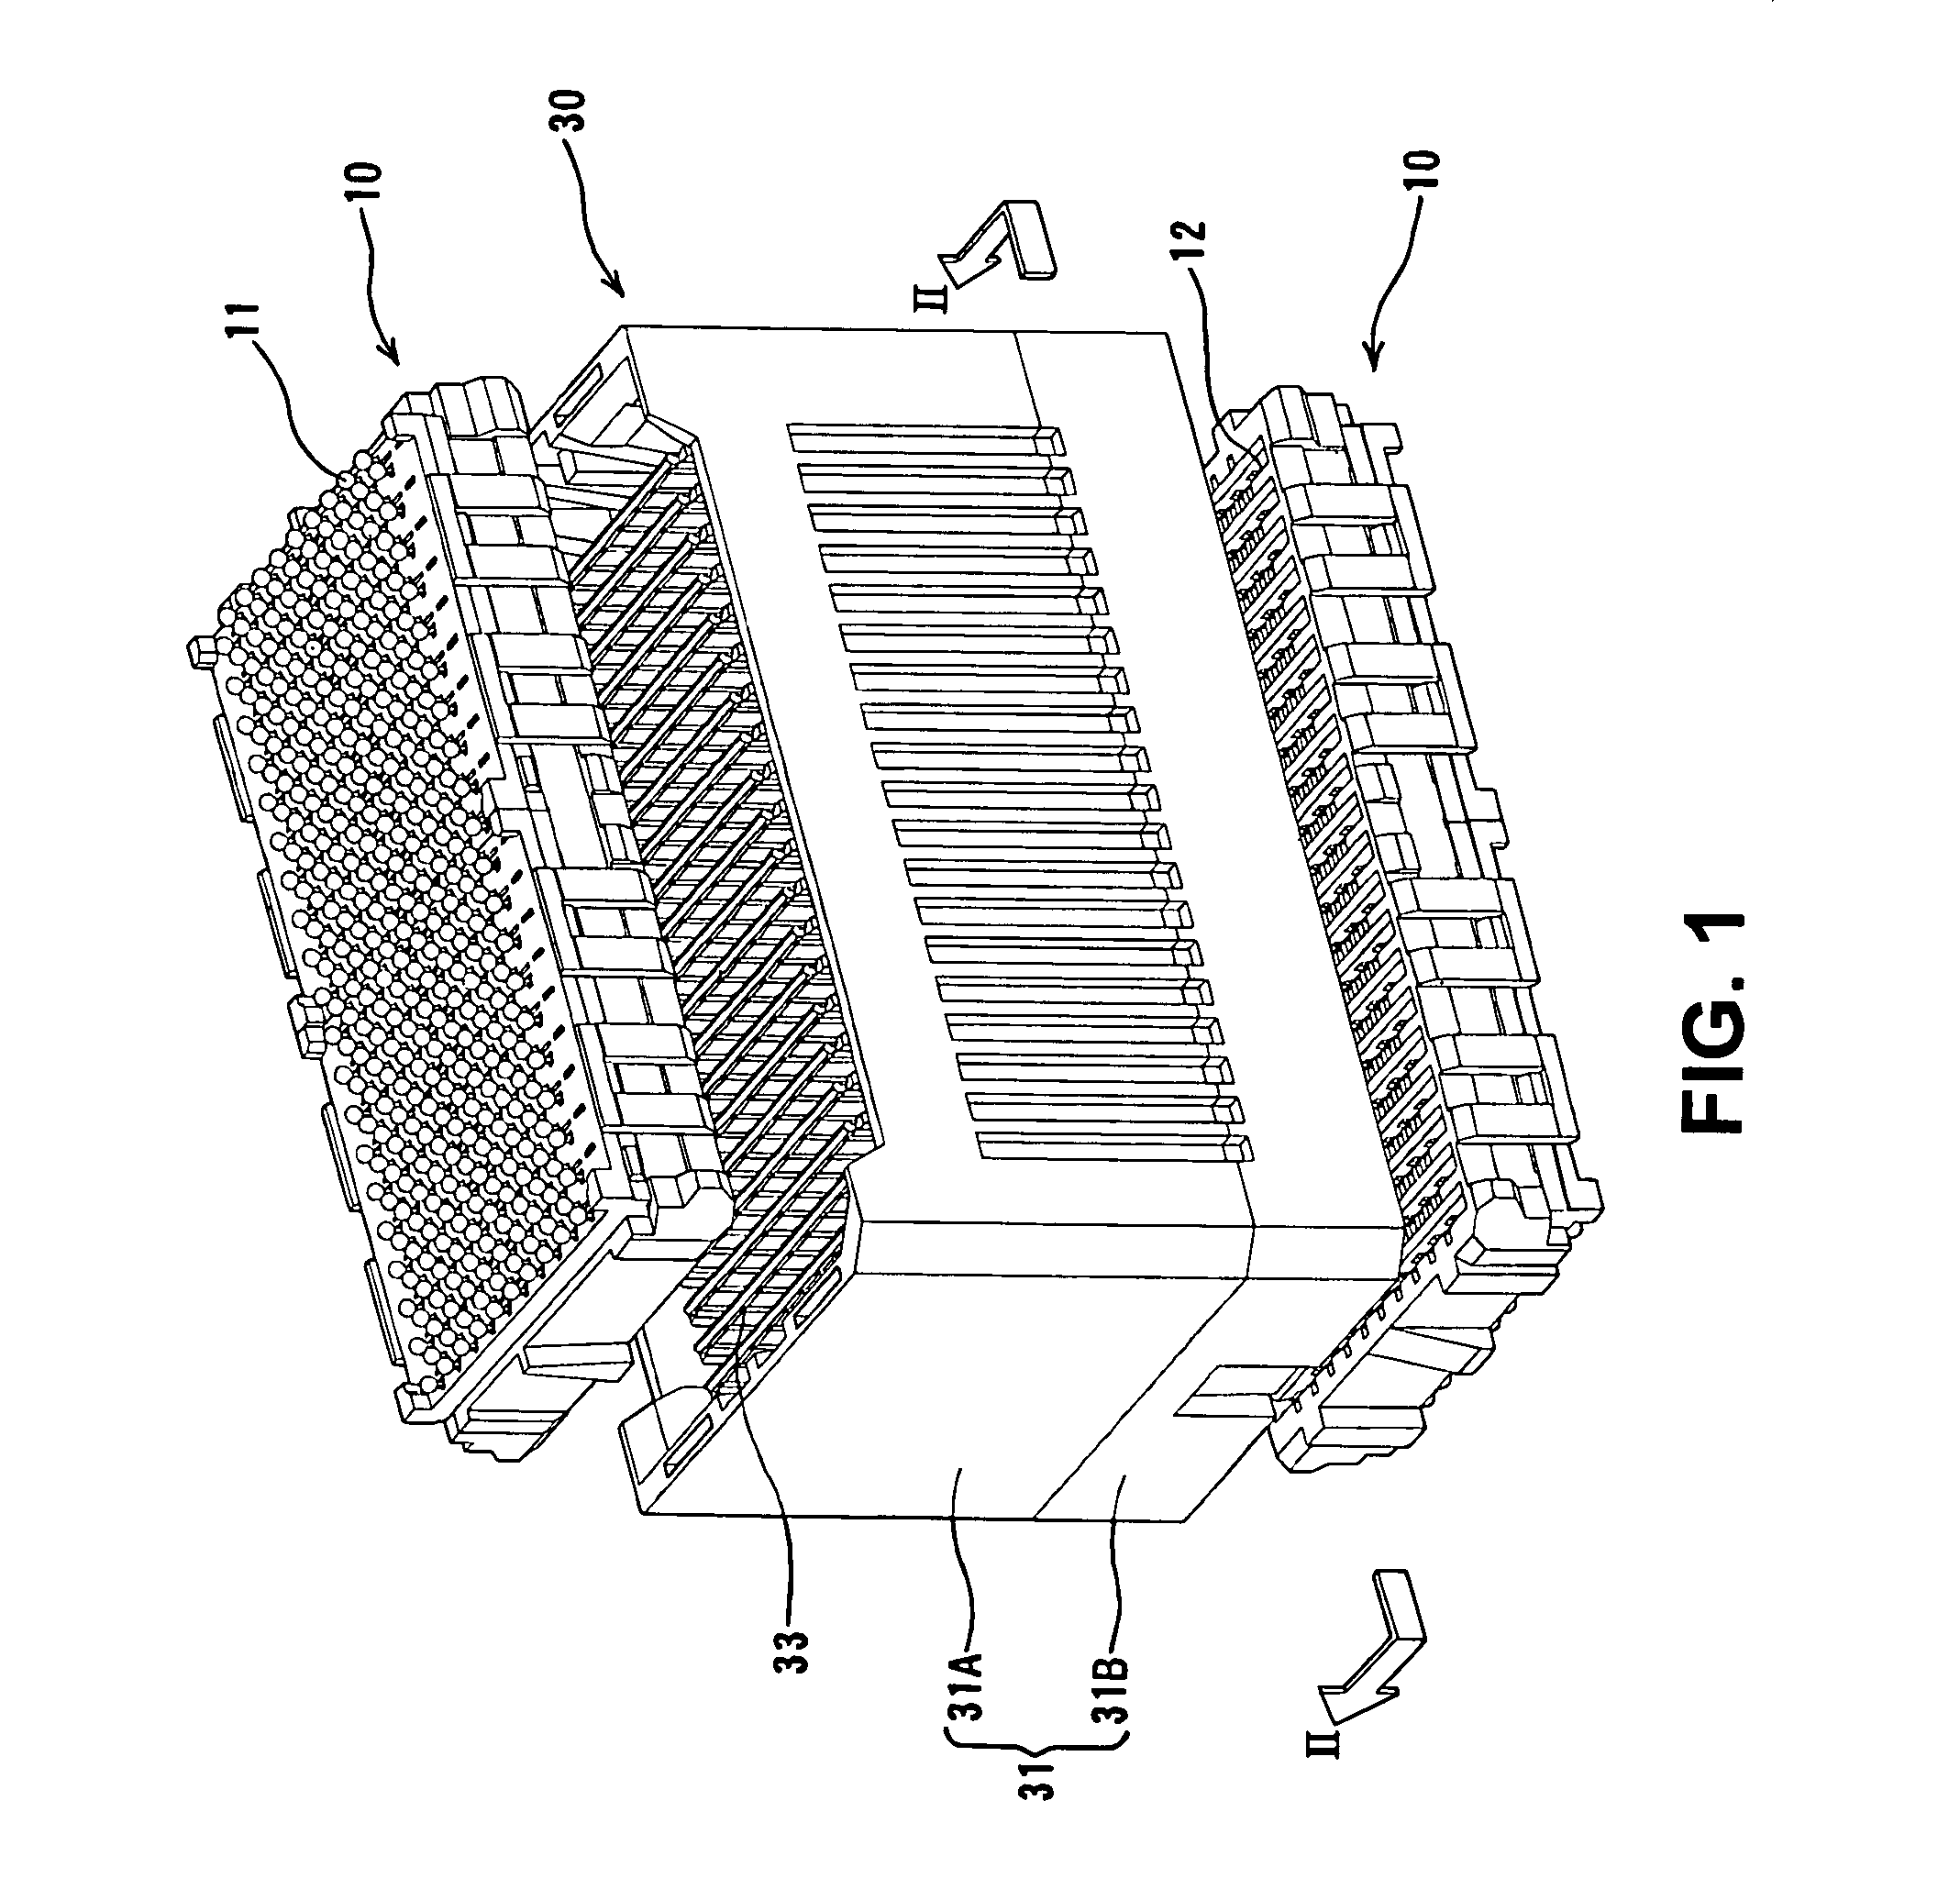 Board electrical connector, and electrical connector assembly having board electrical connector and middle electrical connector